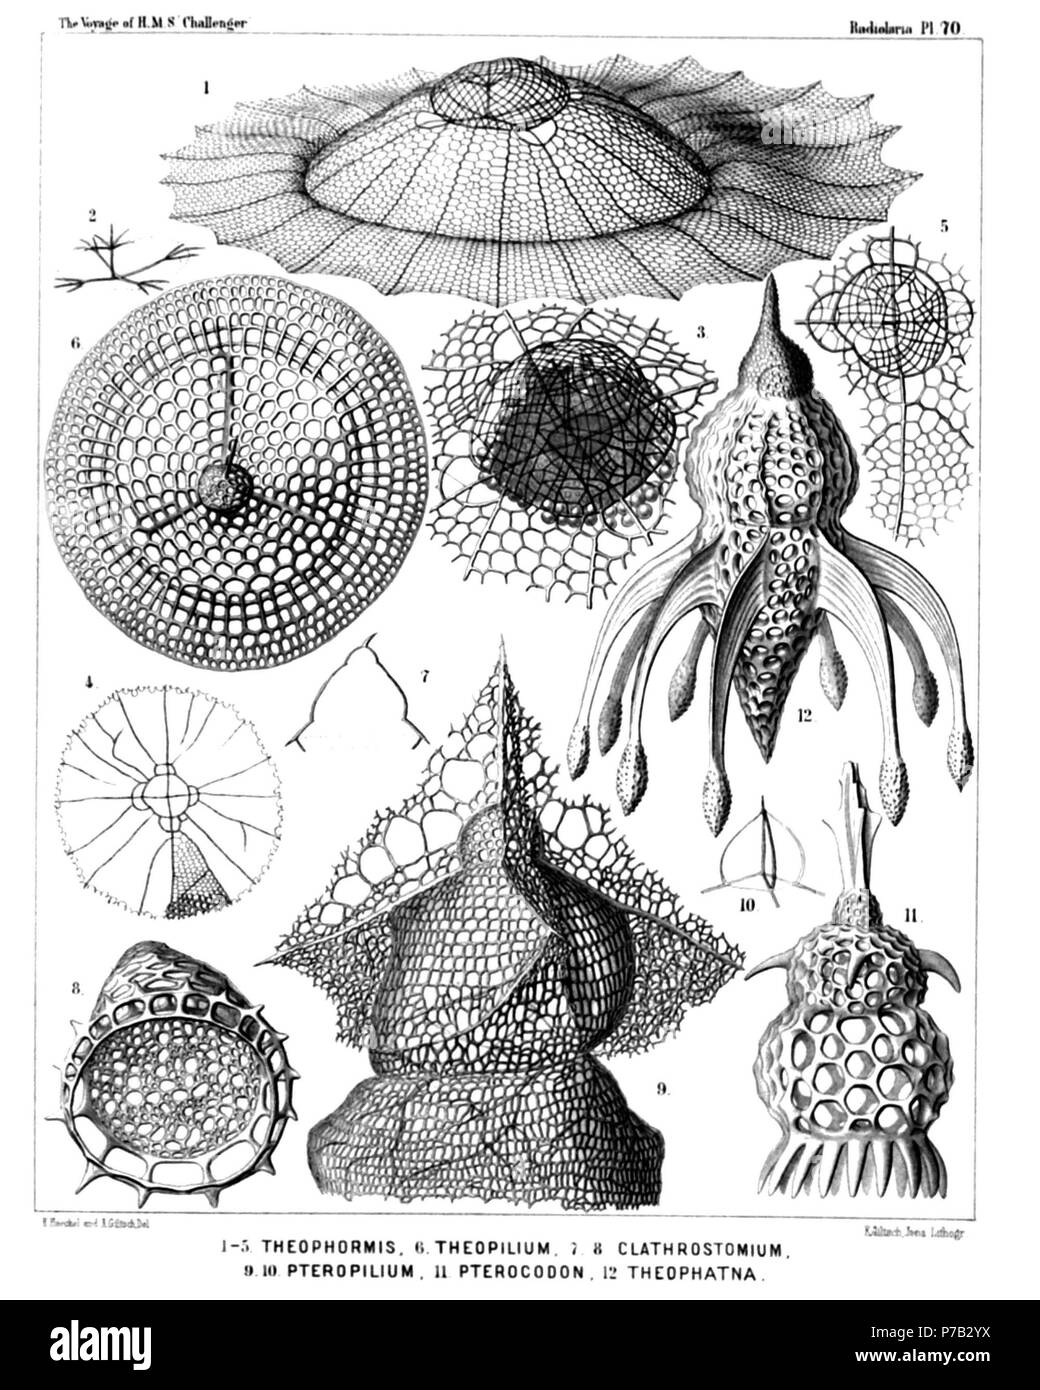 English: Illustration from Report on the Radiolaria collected by H.M.S. Challenger during the years 1873-1876. Part III. Original description follows:  Plate 70. Anthocyrtida, Podocyrtida, Phormocyrtida et Theocyrtida.  Diam.  Fig. 1. Theophormis callipilium, n. sp., × 300  Fig. 2. Theophormis callipilium, n. sp., × 300  The four cruciate rods of the cortinar septum and the vertical columella in its centre.  Fig. 3. Theophormis callipilium, n. sp., × 400  The cephalis alone with the enclosed quadrilobate central capsule, which is surrounded by numerous xanthellæ.  Fig. 4. Sethophormis umbrella Stock Photo